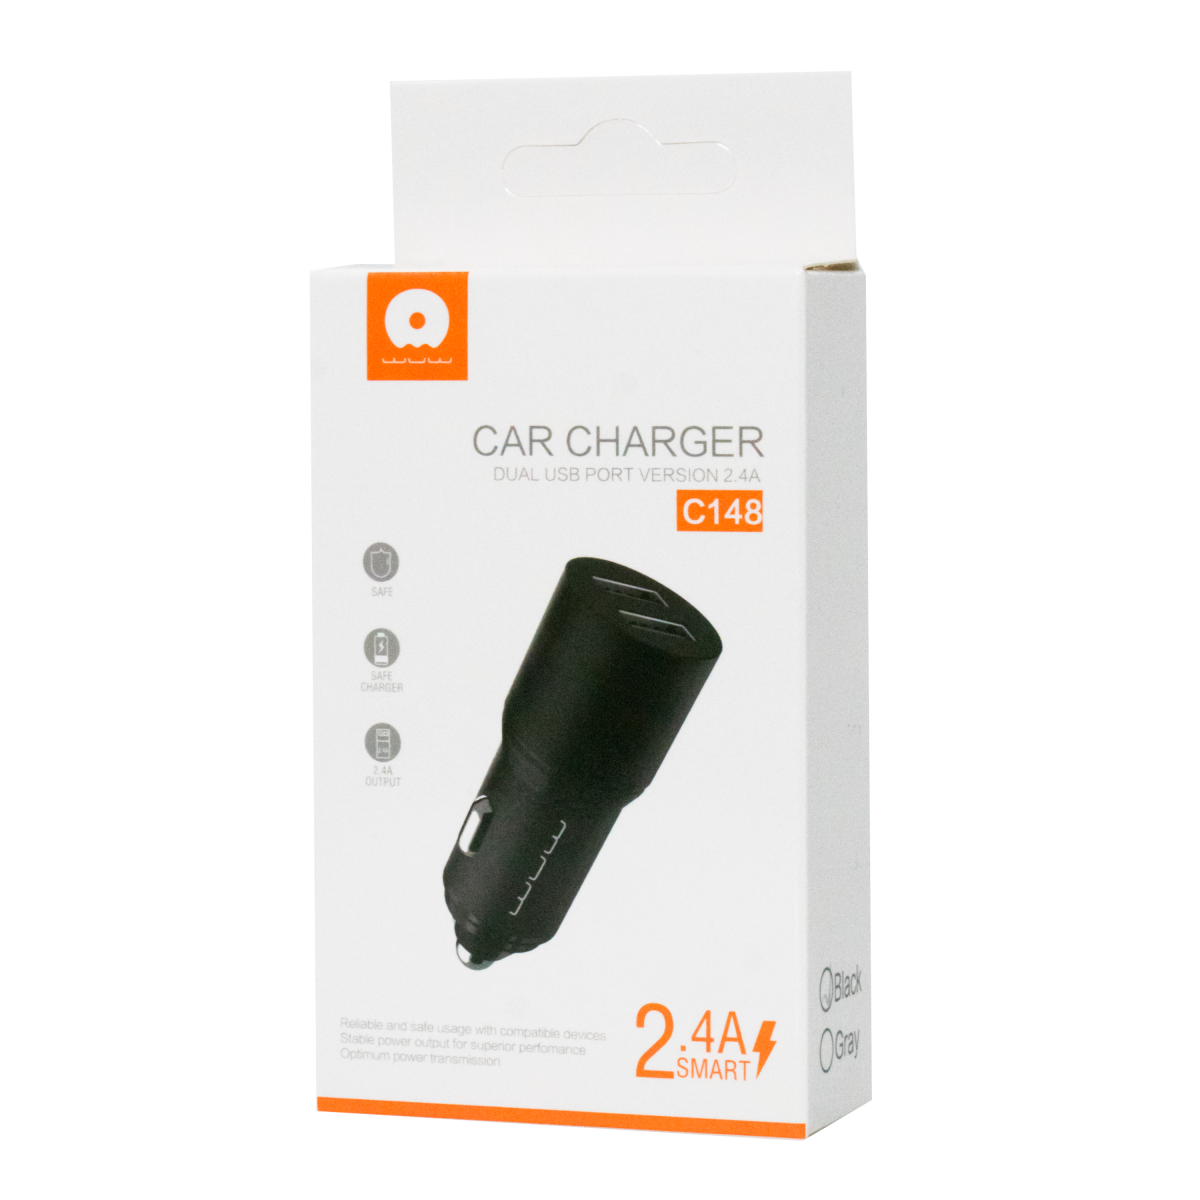 WUW Car Charger 2USB 2.4A C148